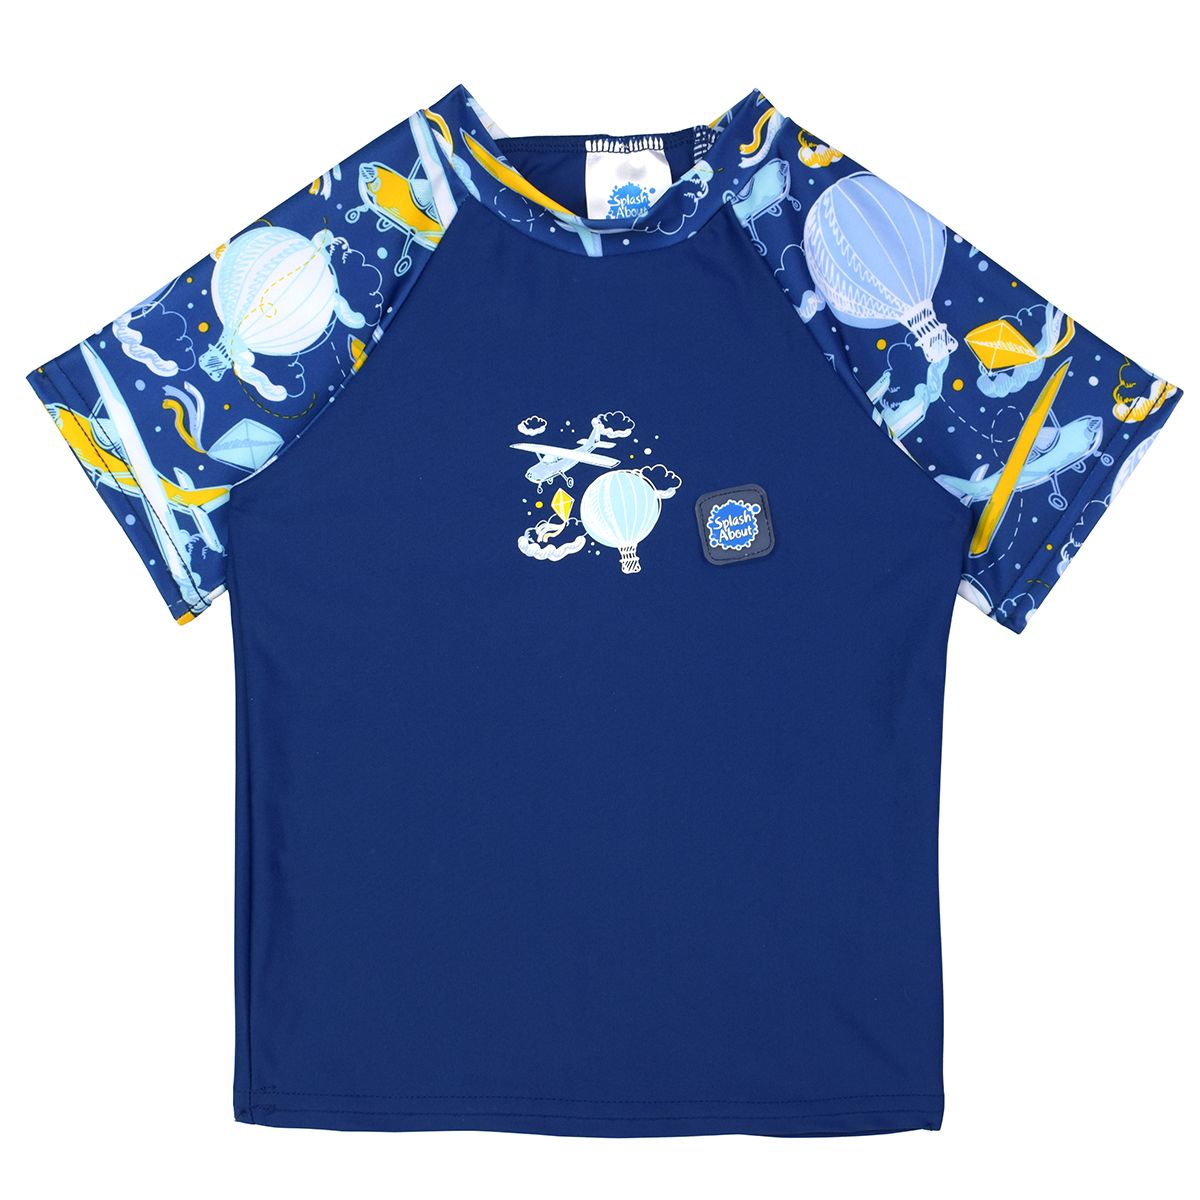 UV protective short sleeve rash top in navy blue, and sky themed print on the chest and sleeves, including airplanes, kites, hot air balloons and clouds. Front.